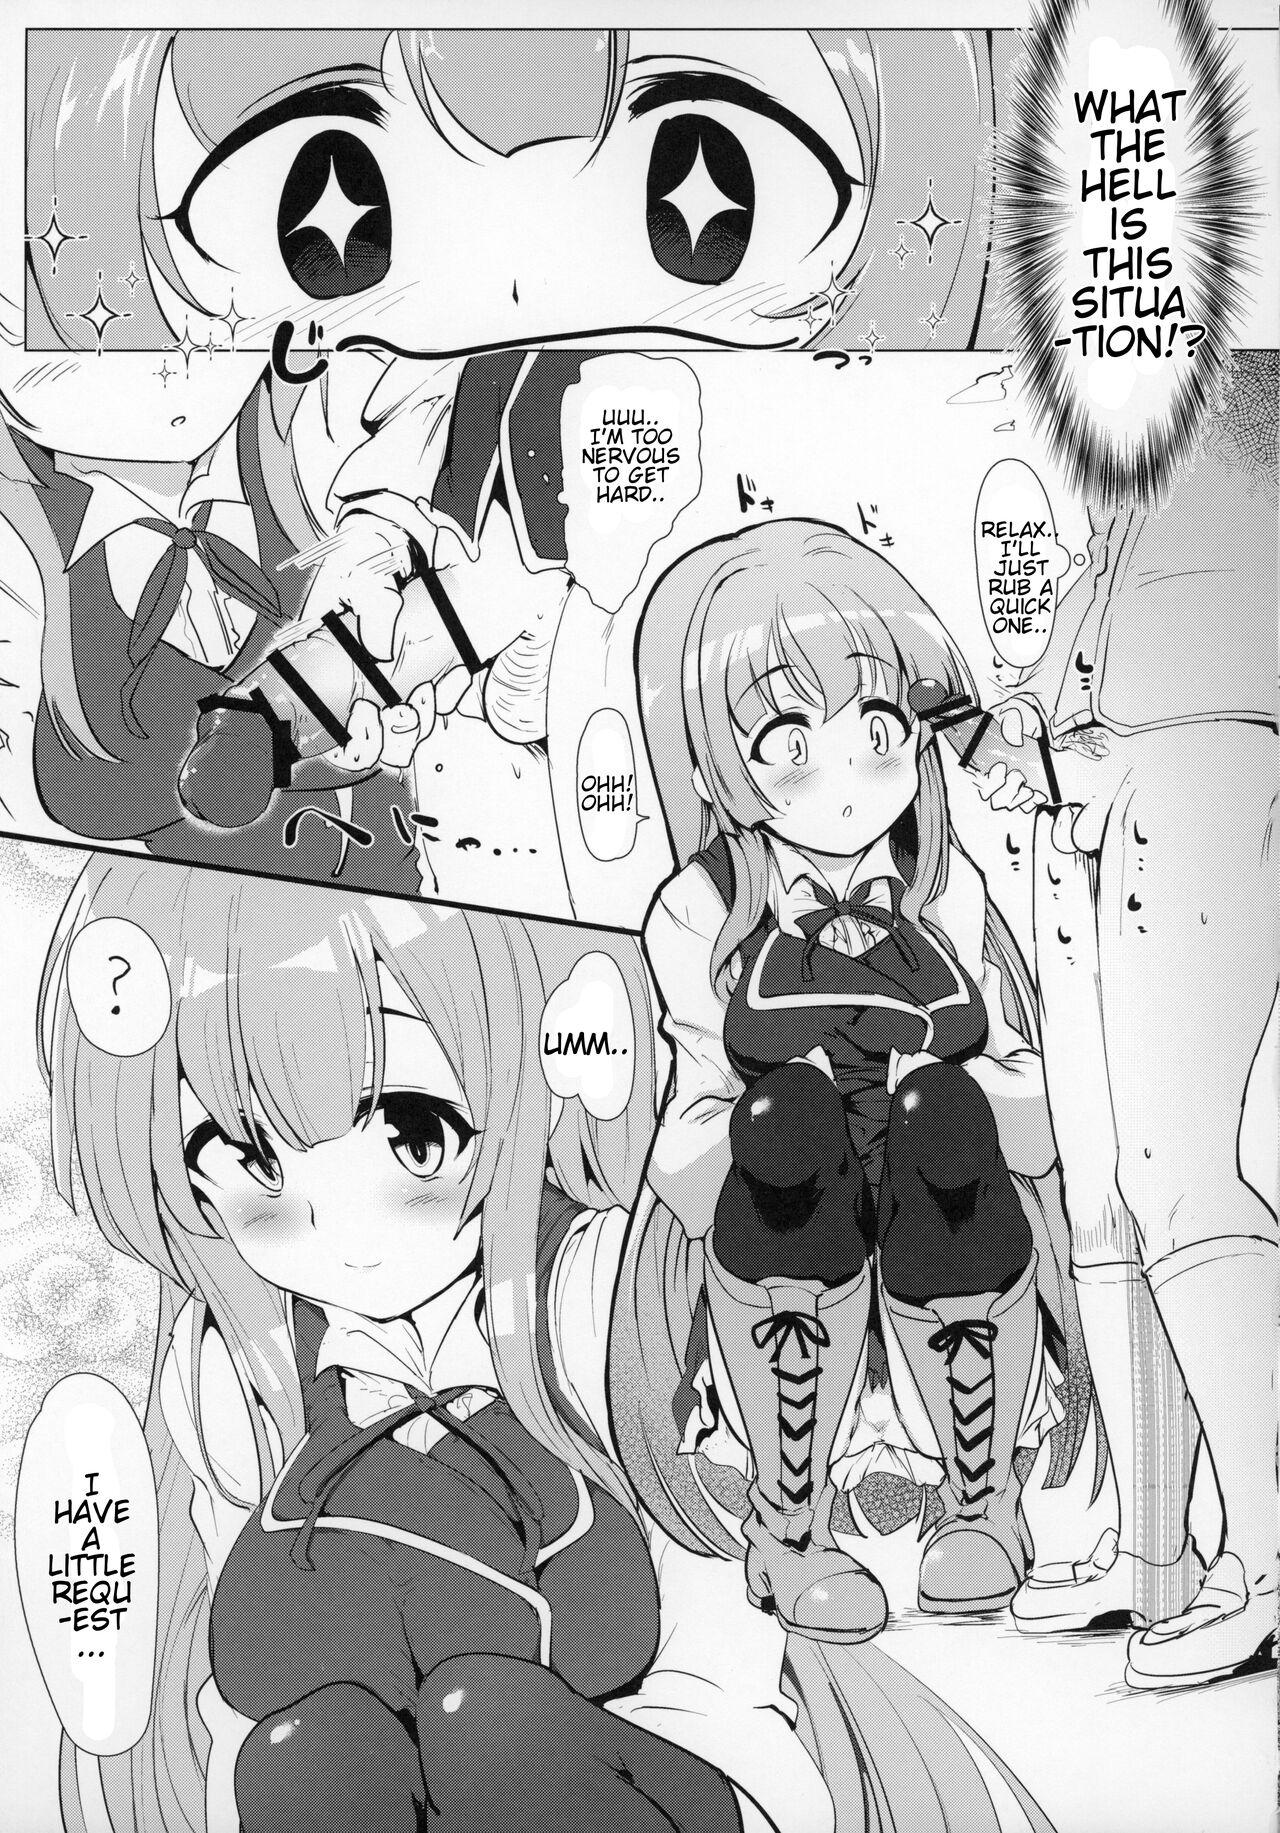 Doggystyle There's No Way An Ecchi Event Will Happen Between Me and the Princess of Manaria Kingdom! - Manaria friends Teenage Sex - Page 10